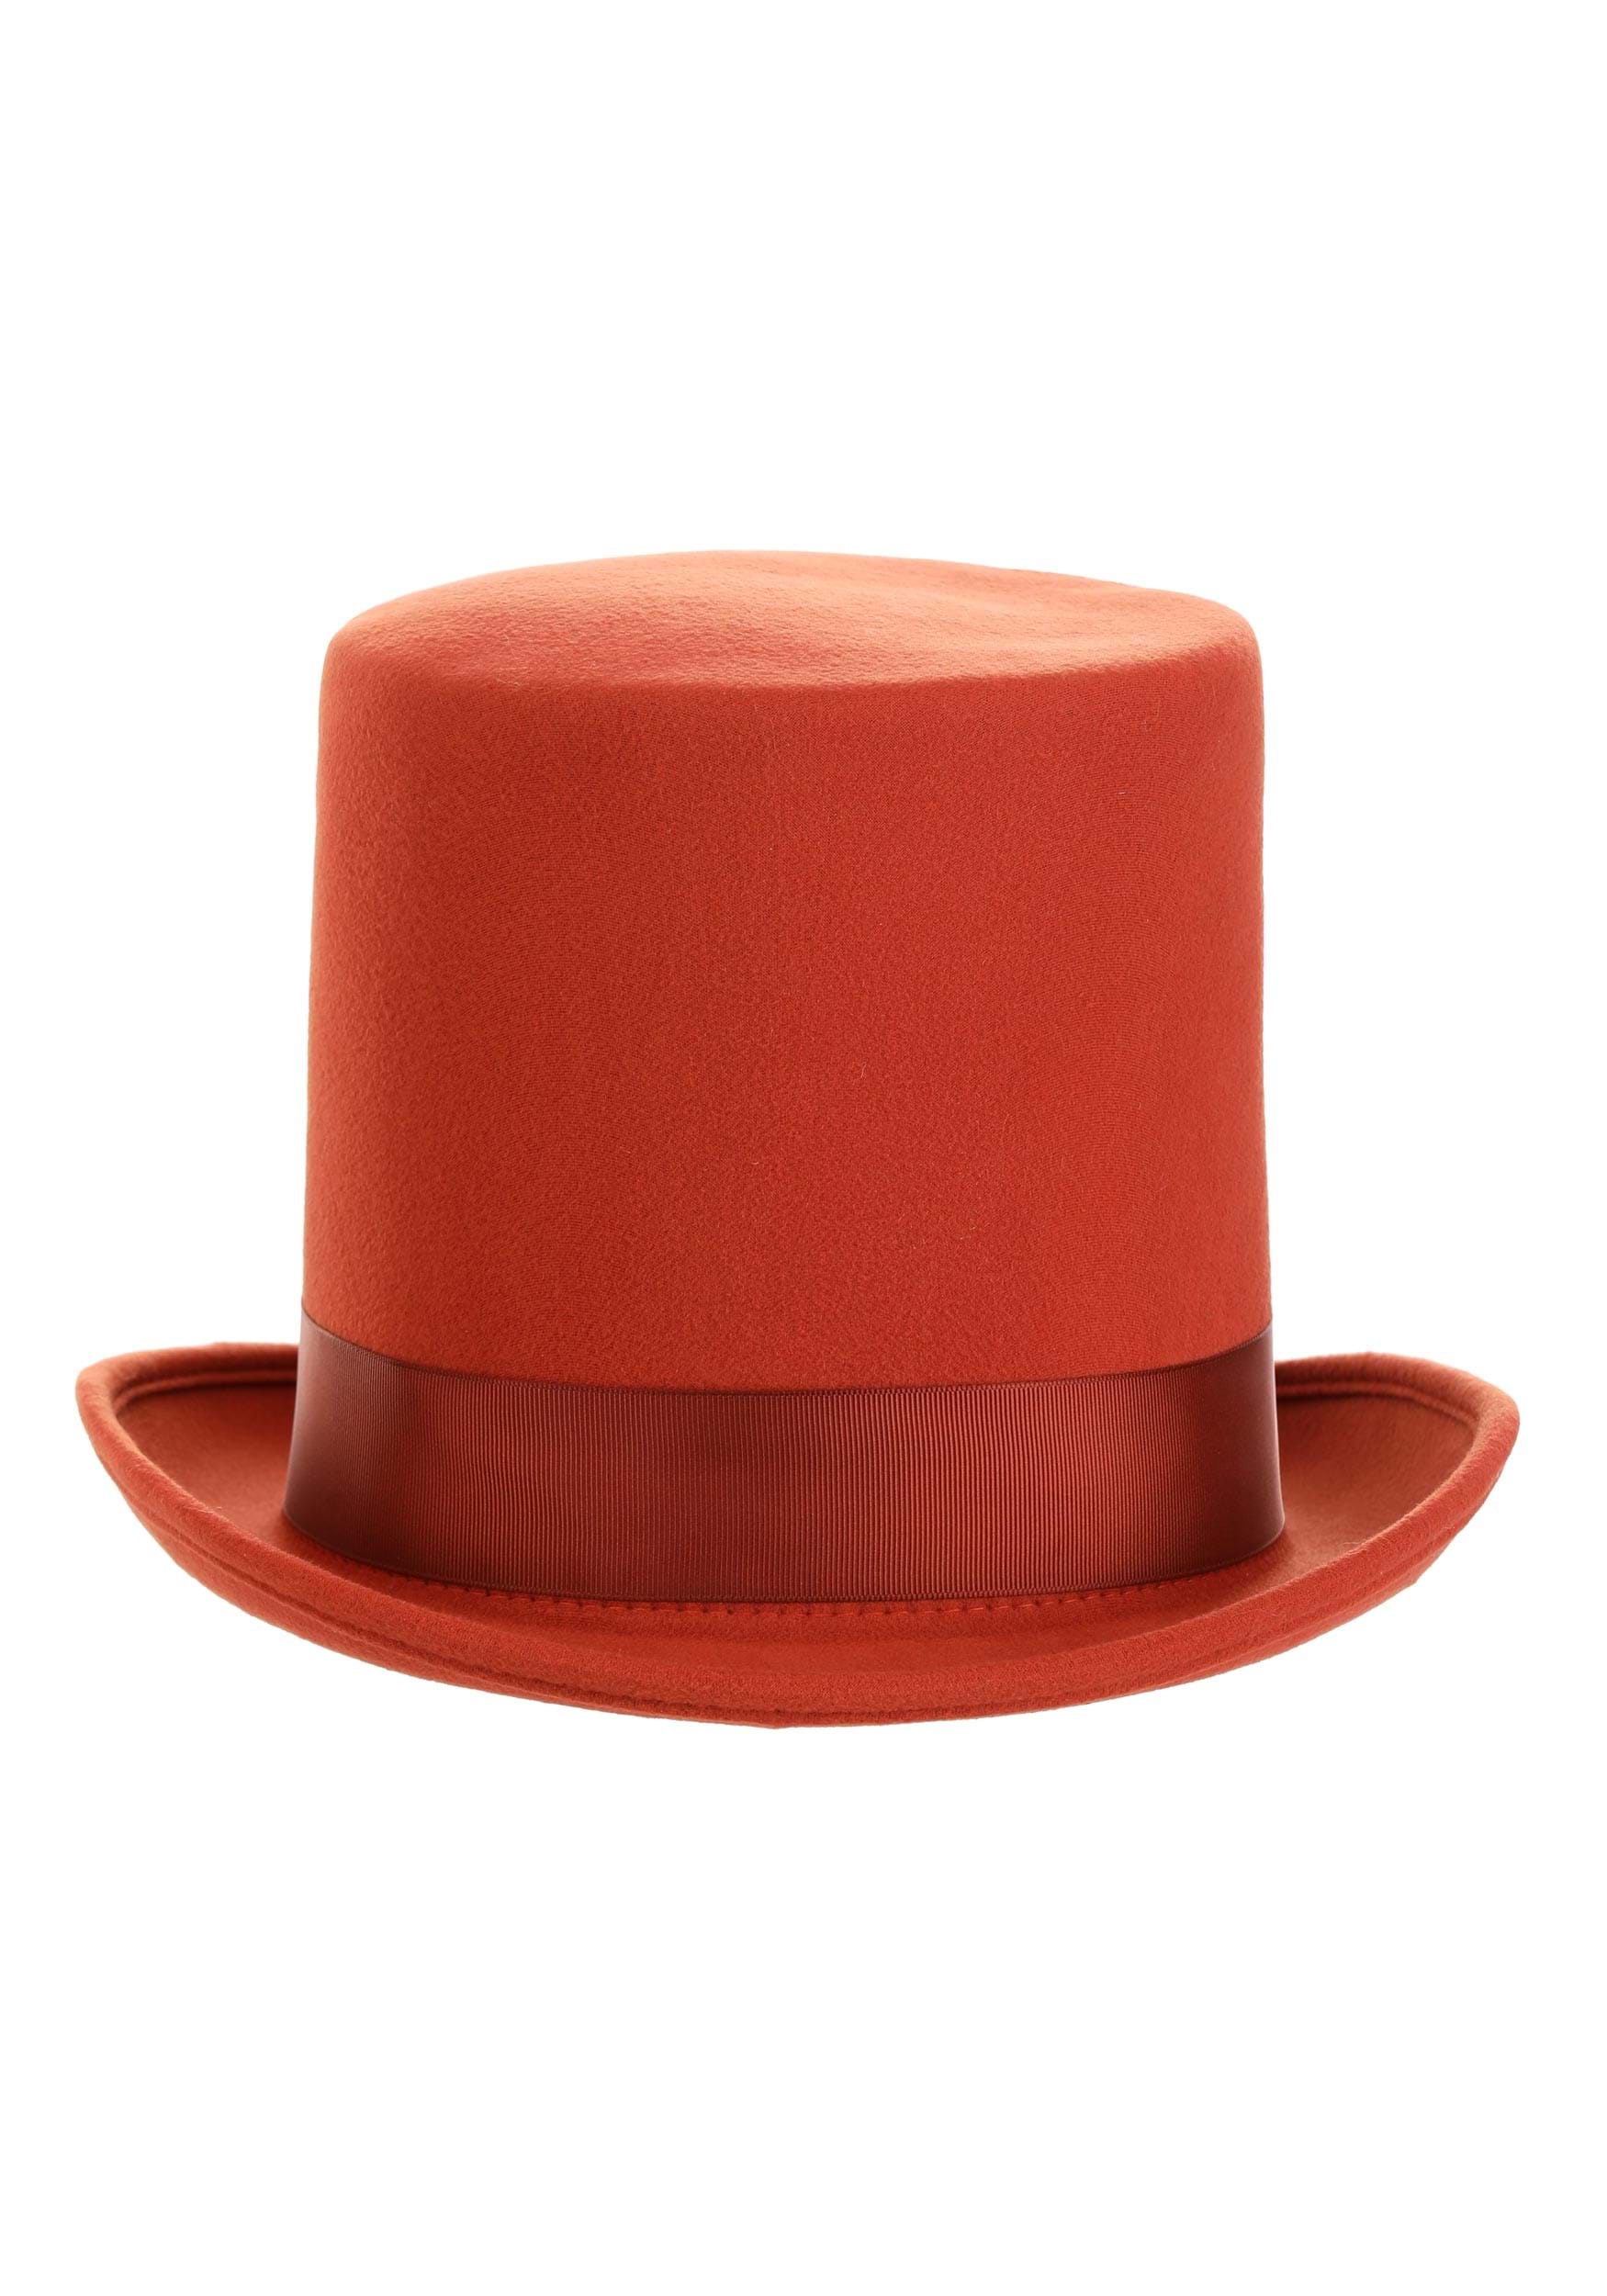 Authentic Willy Wonka Hat For Men , Fancy Dress Costume Hat Accessories